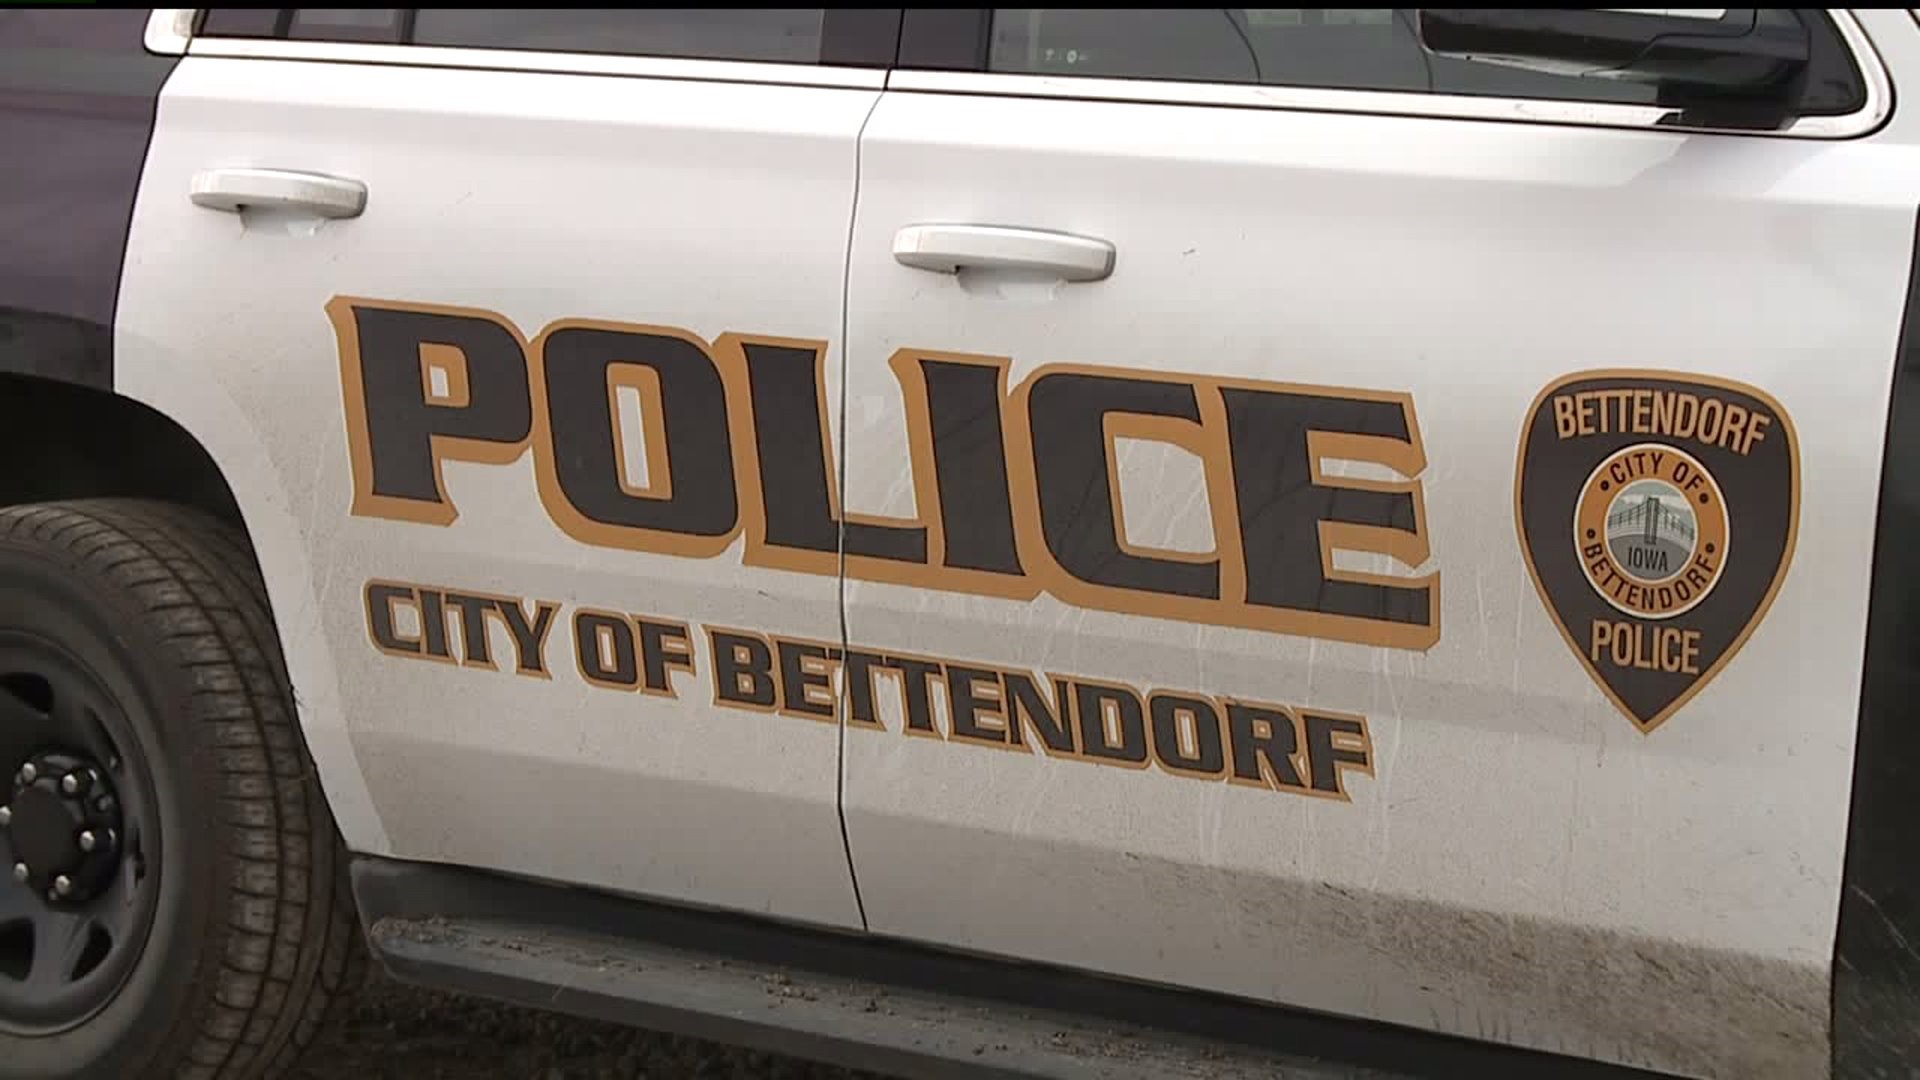 One arrested after leading police on chase from Hampton to Bettendorf